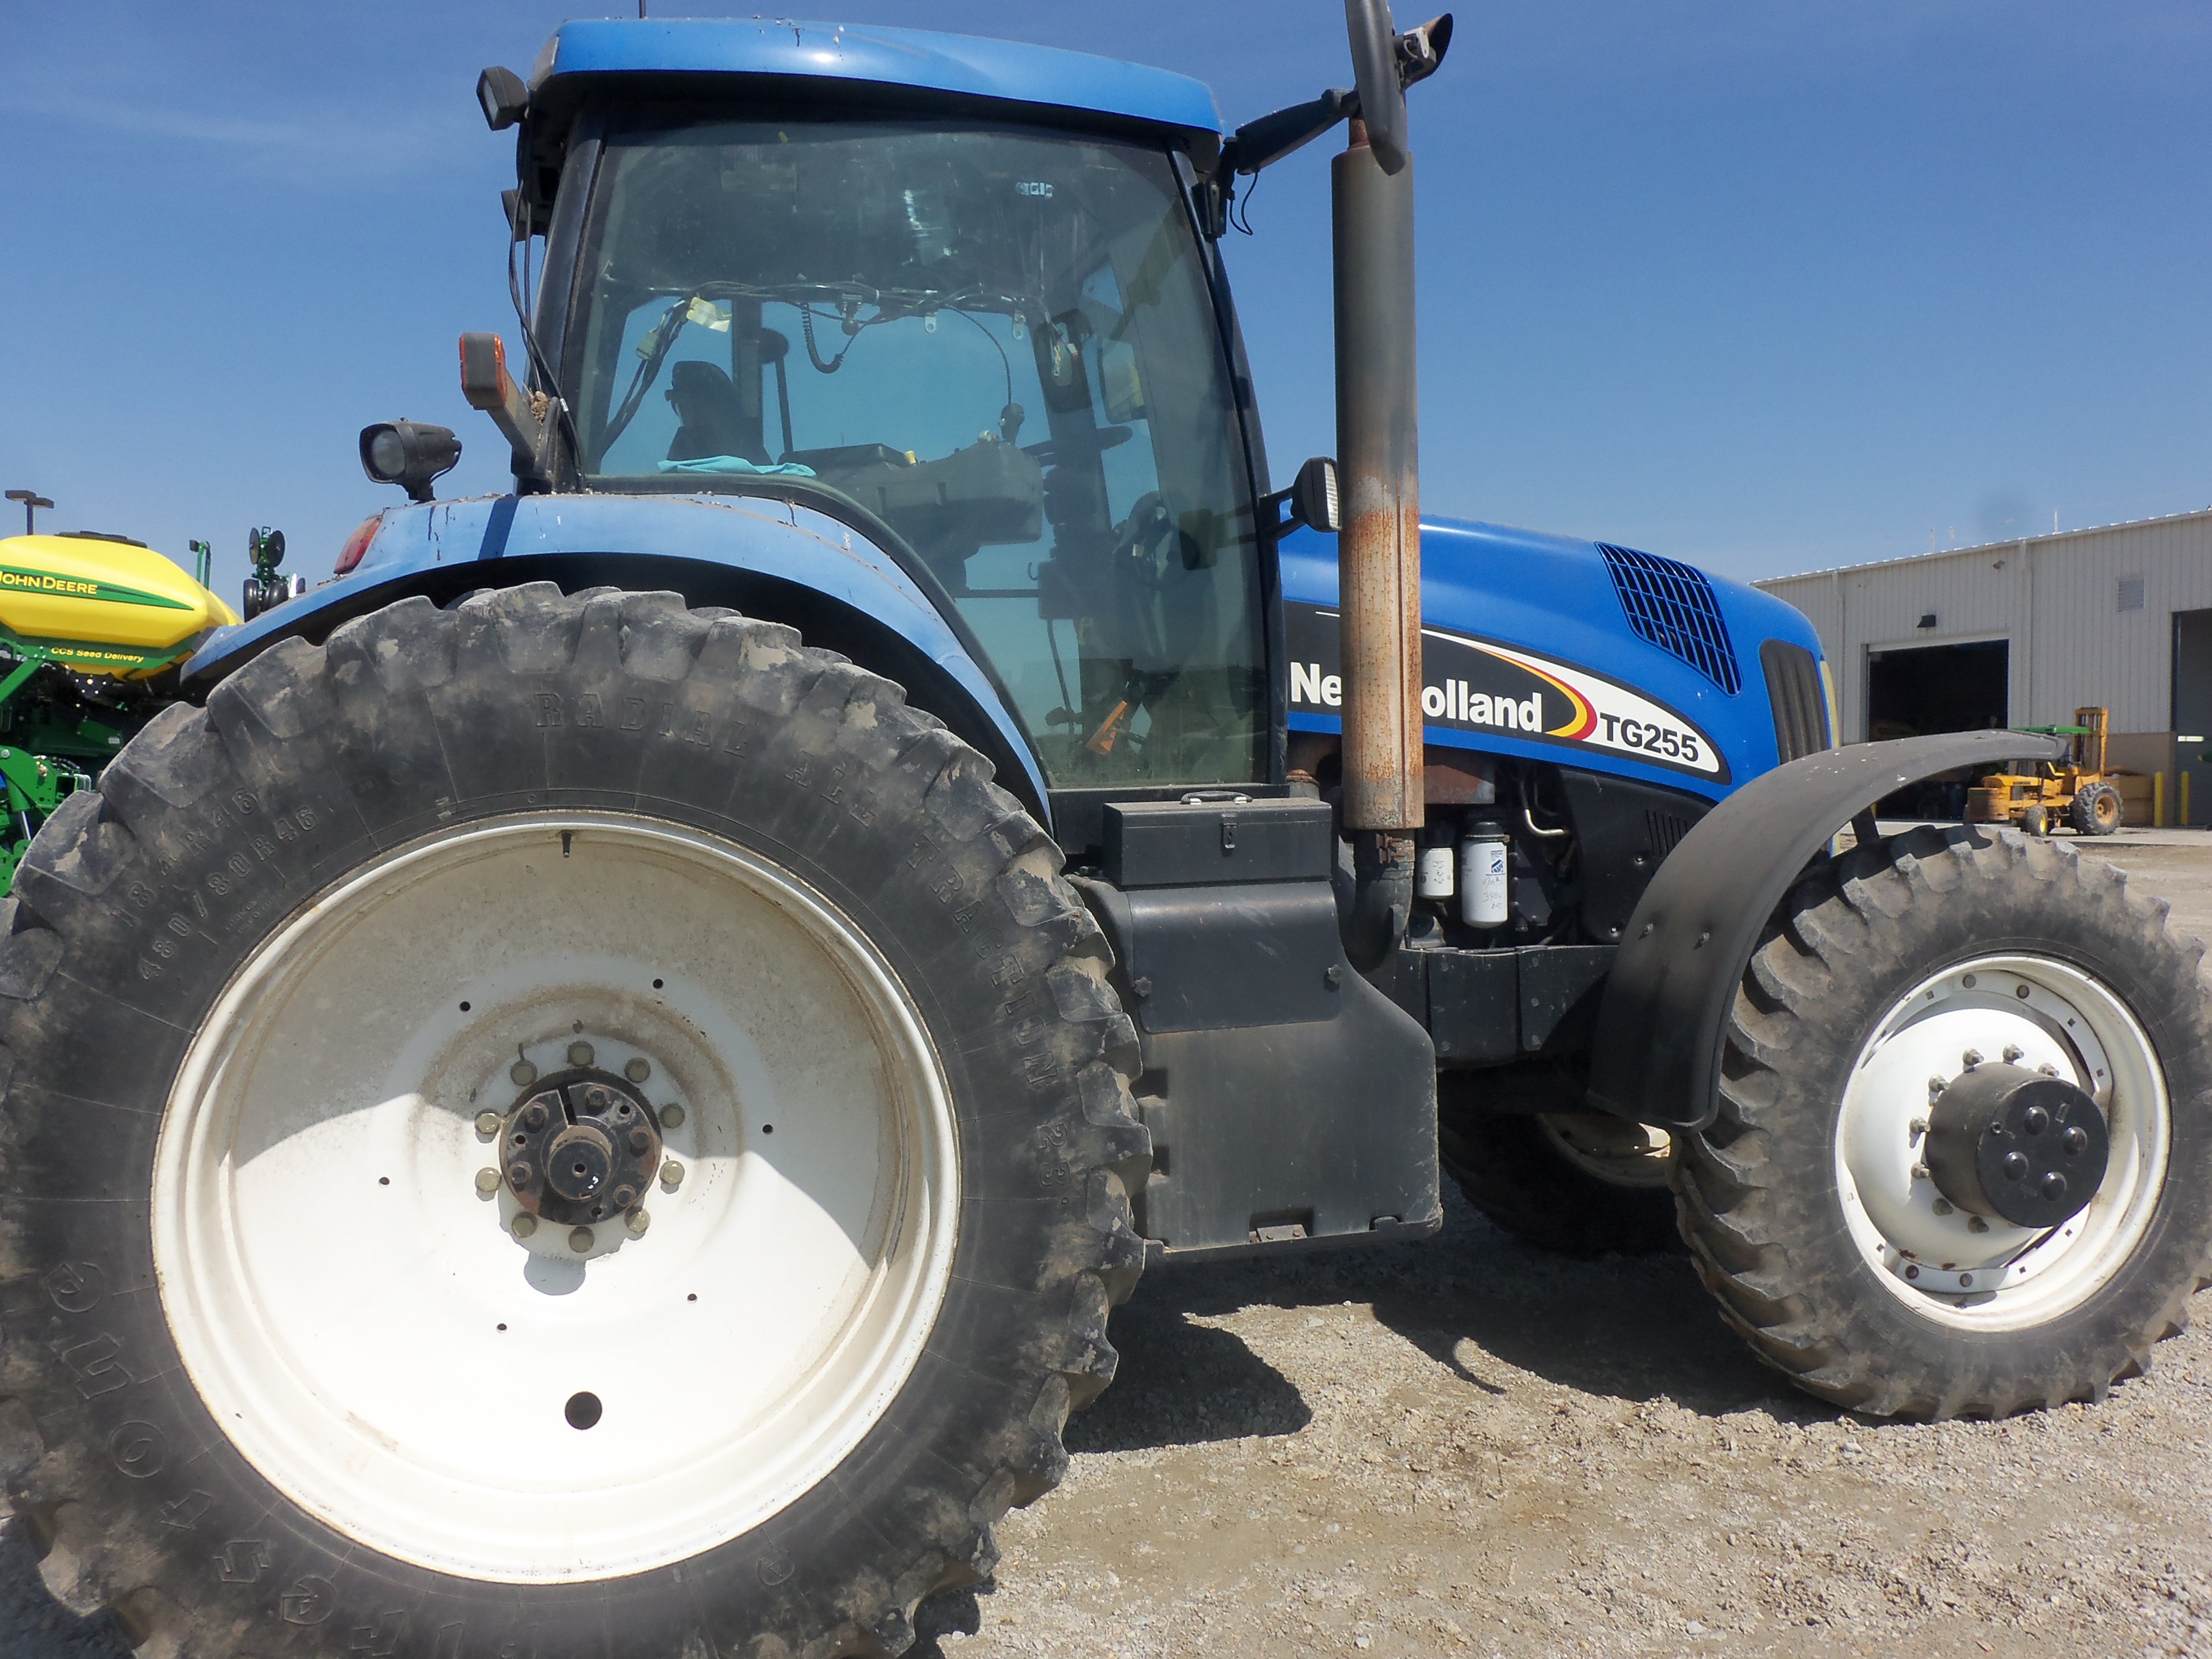 Right side of New Holland TG255 tractor | New Holland farm equipment ...